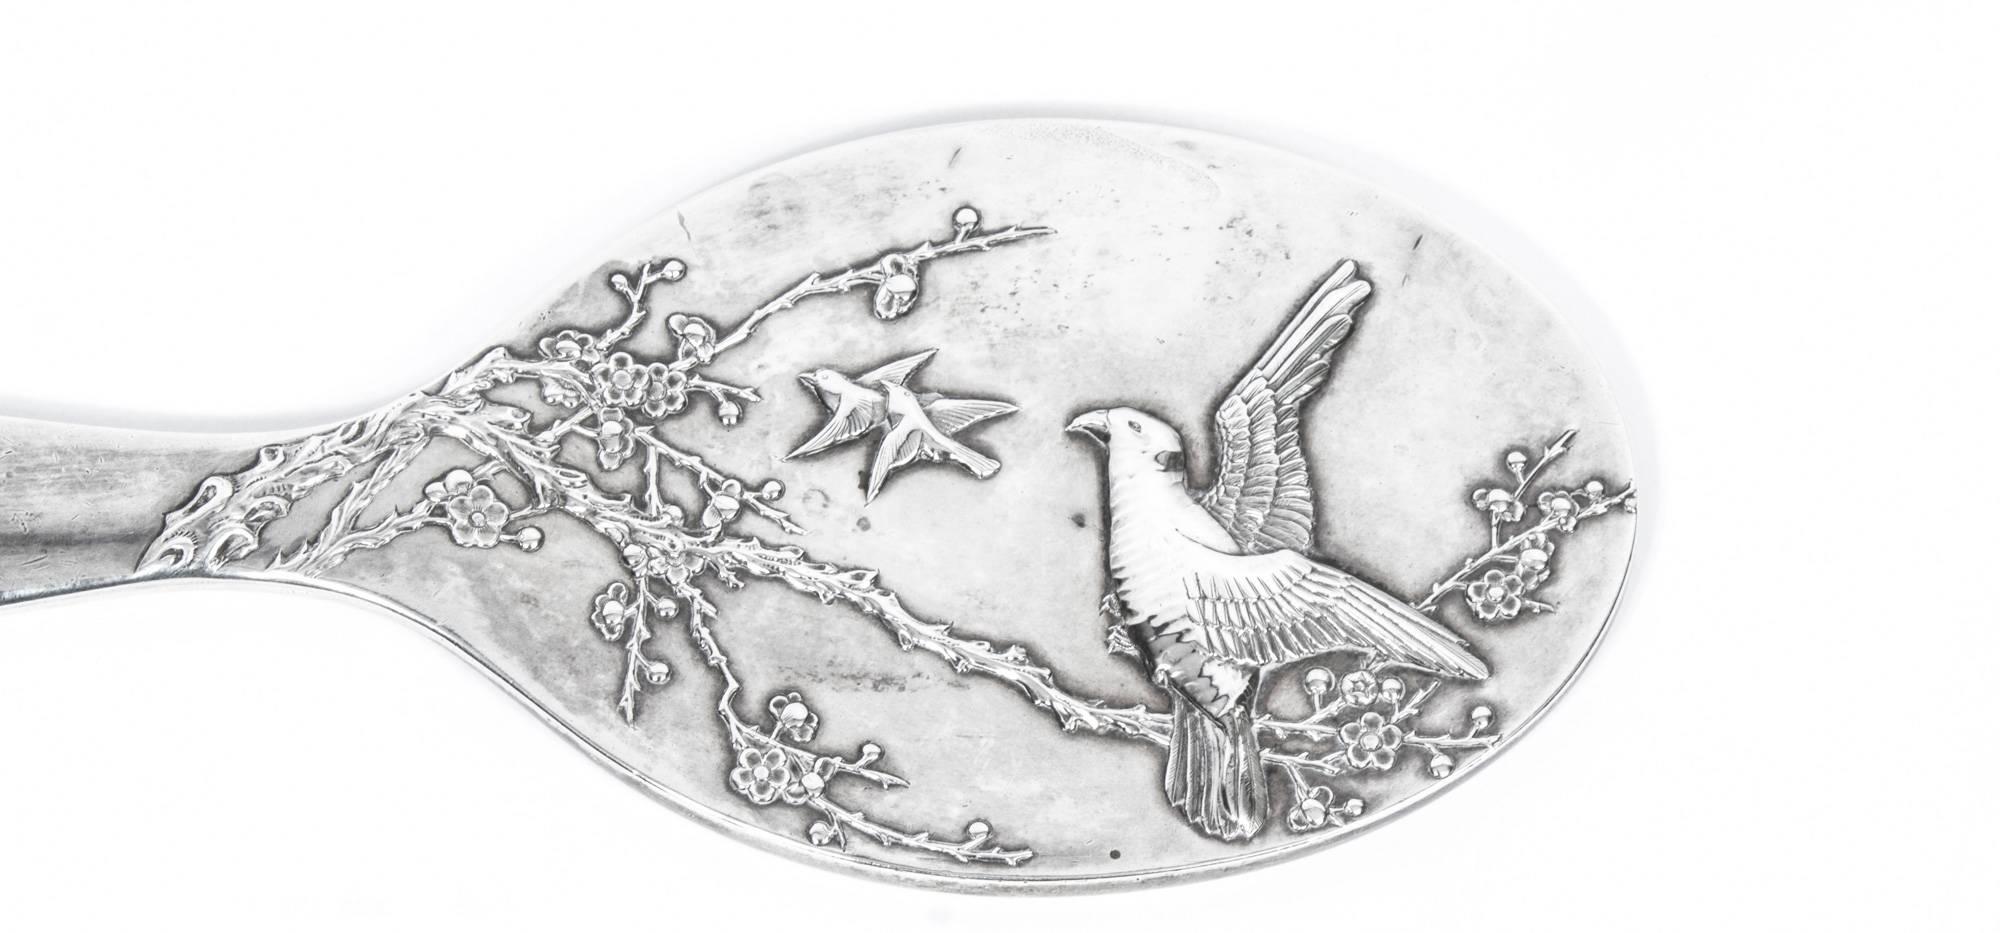 This is a wonderful antique Chinese silver export hand mirror, depicting in low relief three birds in flight above a blossom tree.

Bearing marks for the renowned Chinese silversmith Luen Hing, Shanghai, circa 1910.
It is a lovely object which